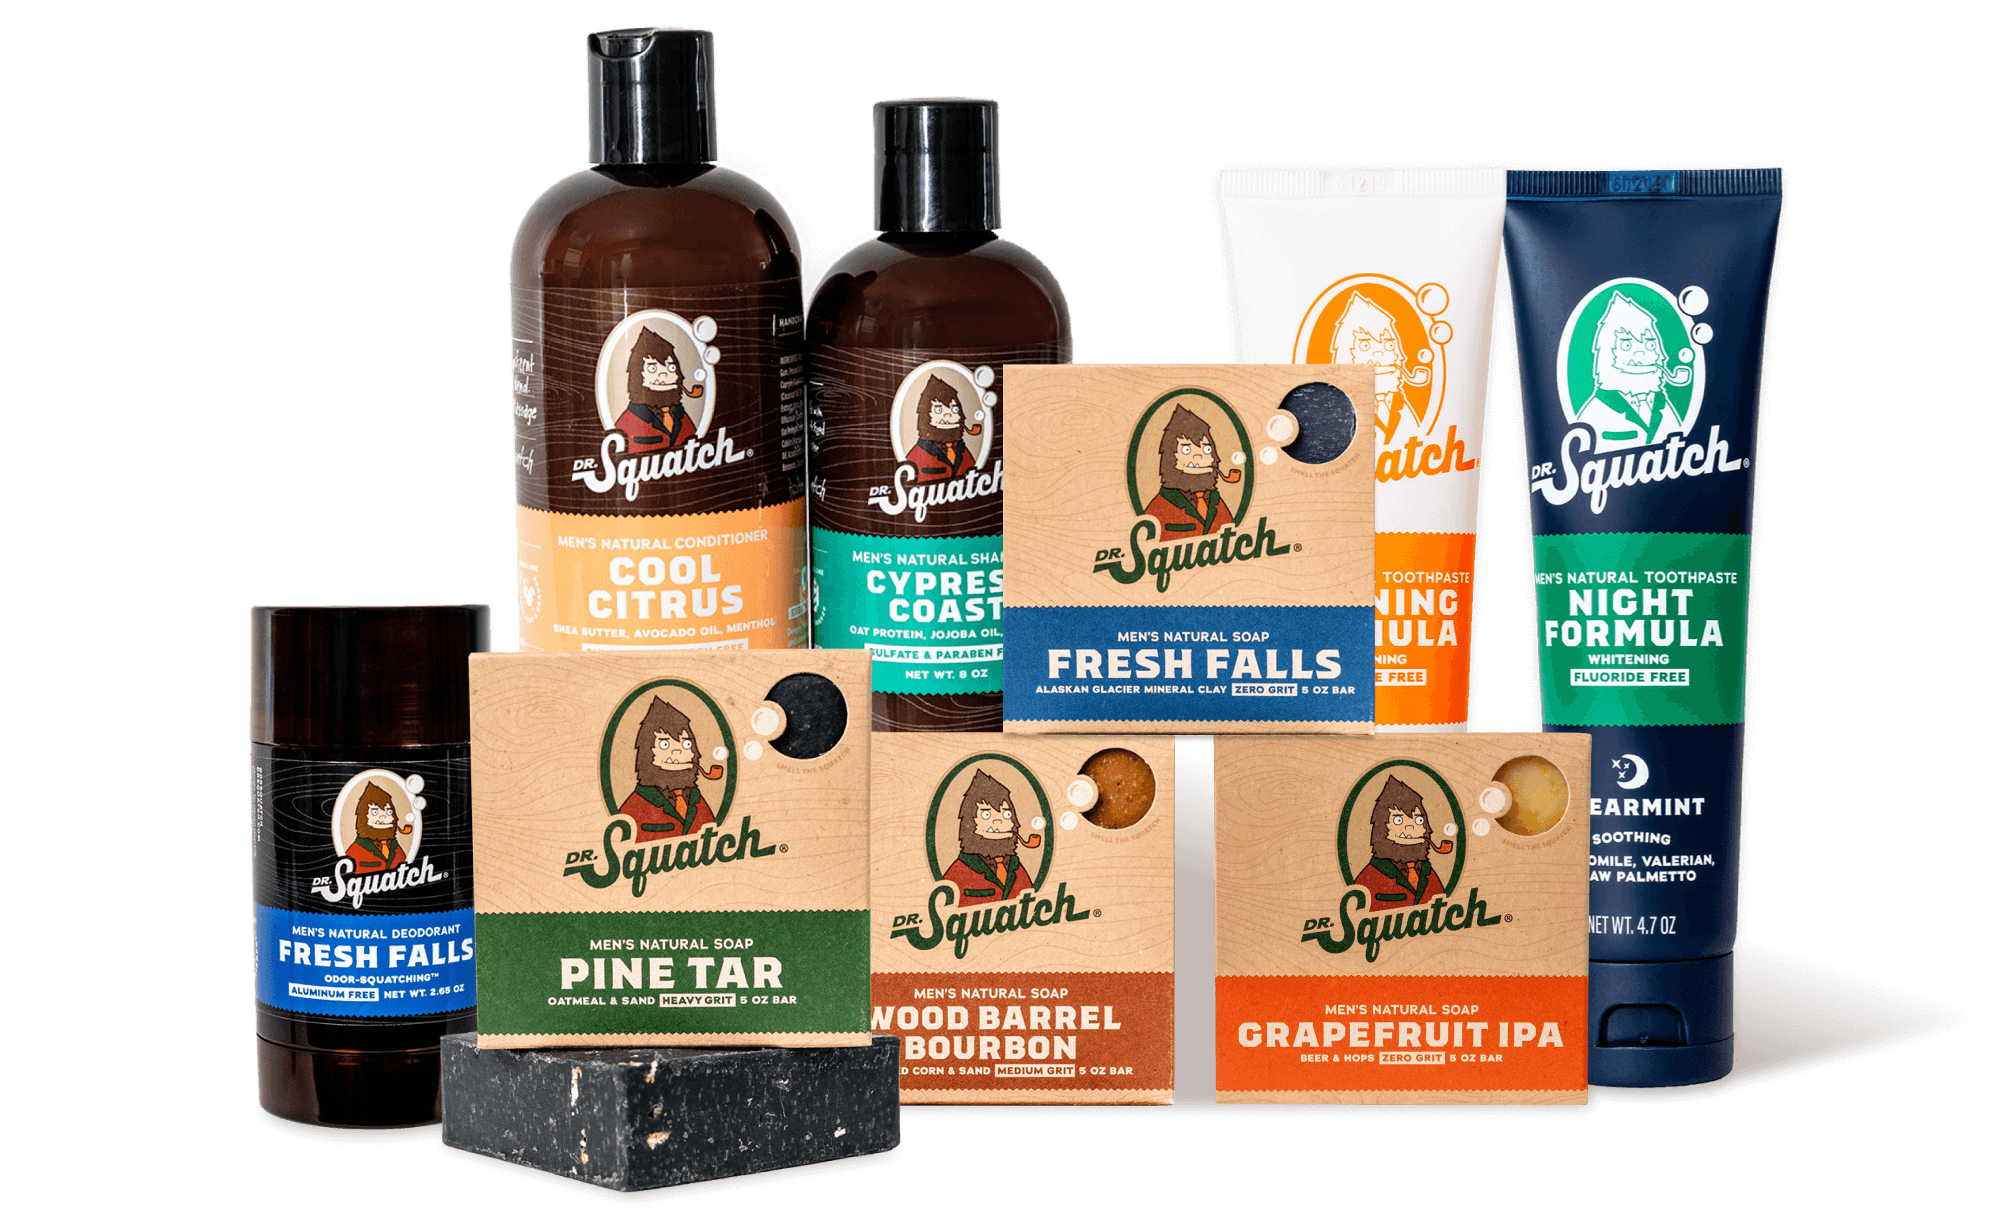 Dr. Squatch Lotion and Soap Pack - Moisturizing Lotion and 4 Bars of  Natural Men's Bar Soap - Pine Tar, Wood Barrel Bourbon, Birchwood Breeze,  and